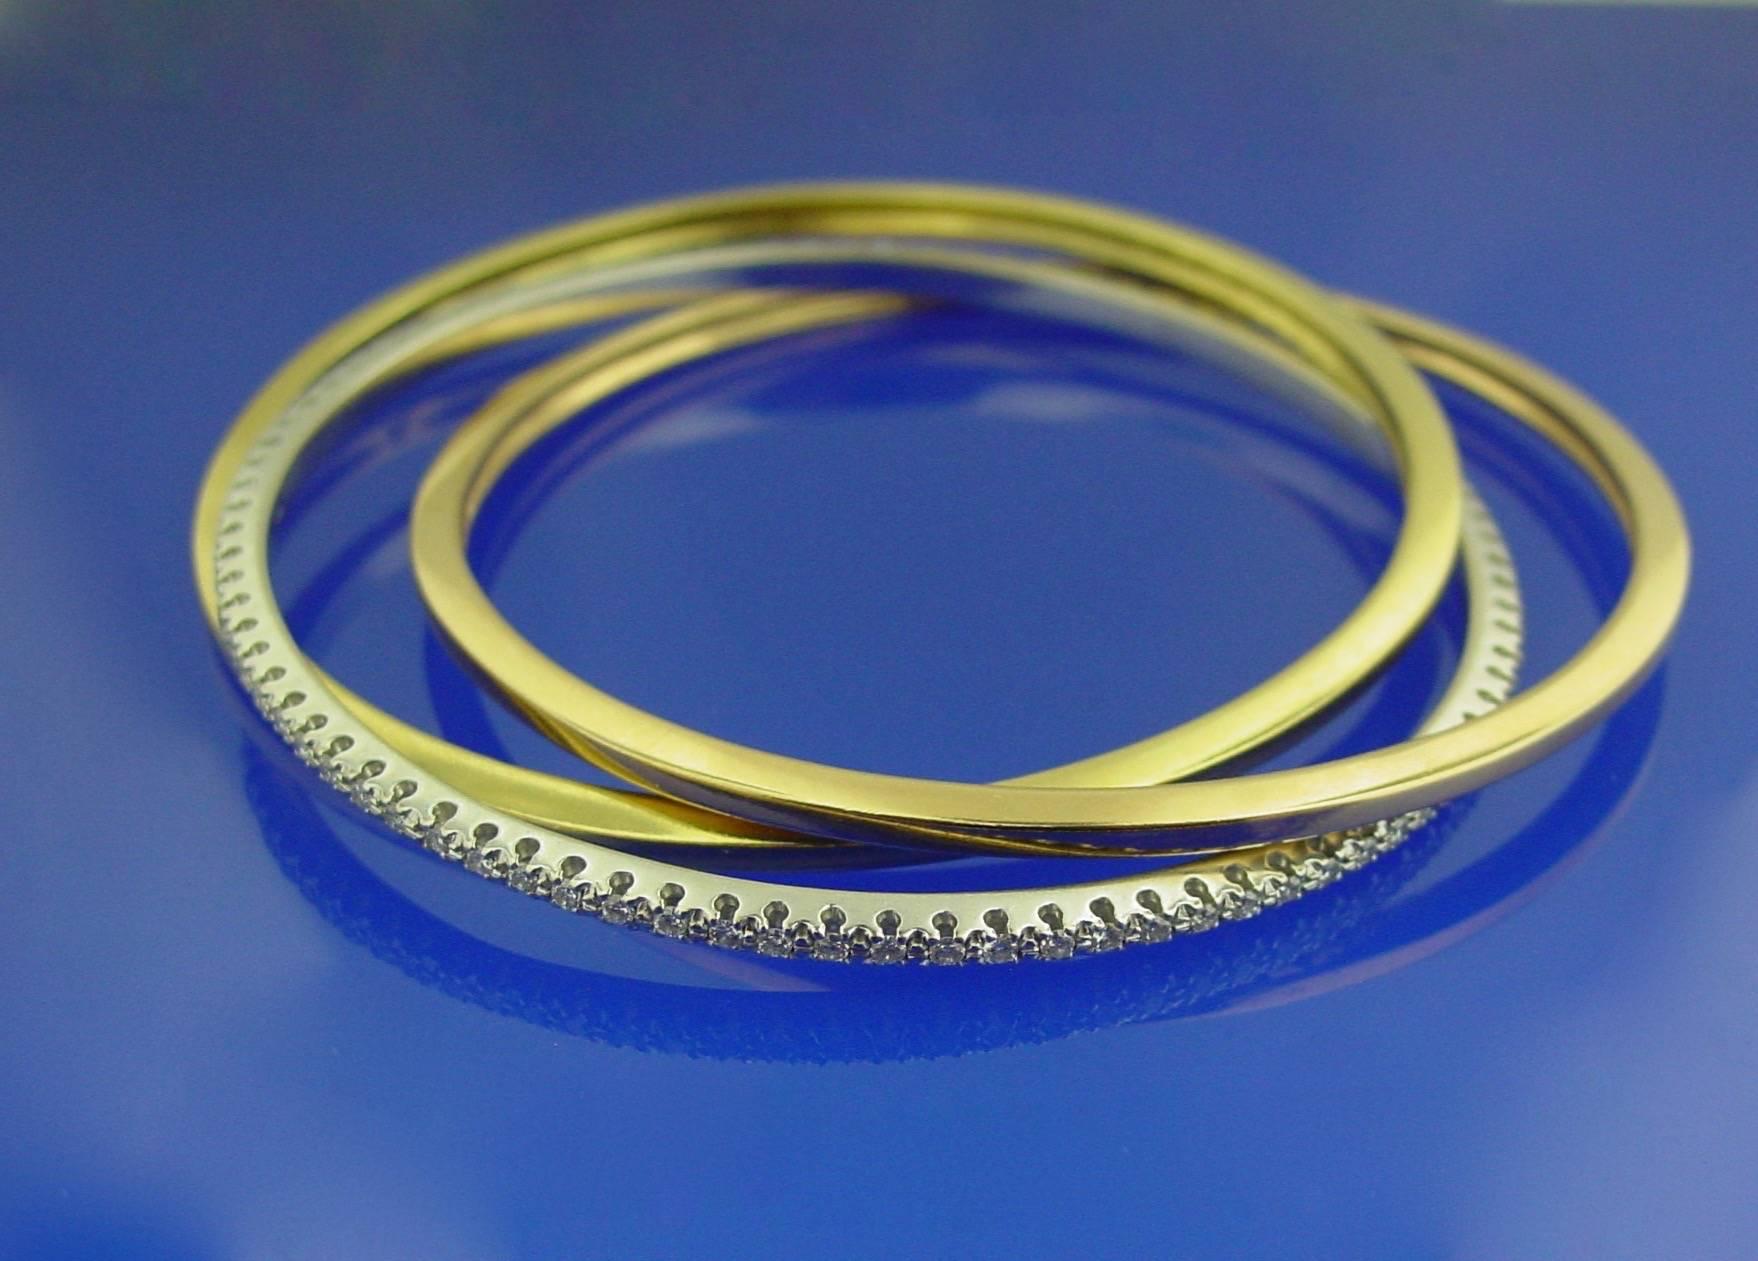 An 18 karat  tri -colored gold and diamond bangle. This versatile and modern piece interlocks a 3mm rose gold bangle, a 3mm yellow gold bangle and a 3mm round brilliant diamond white gold bangle. Approximate carat weight: 1.75 carats. Very nicely